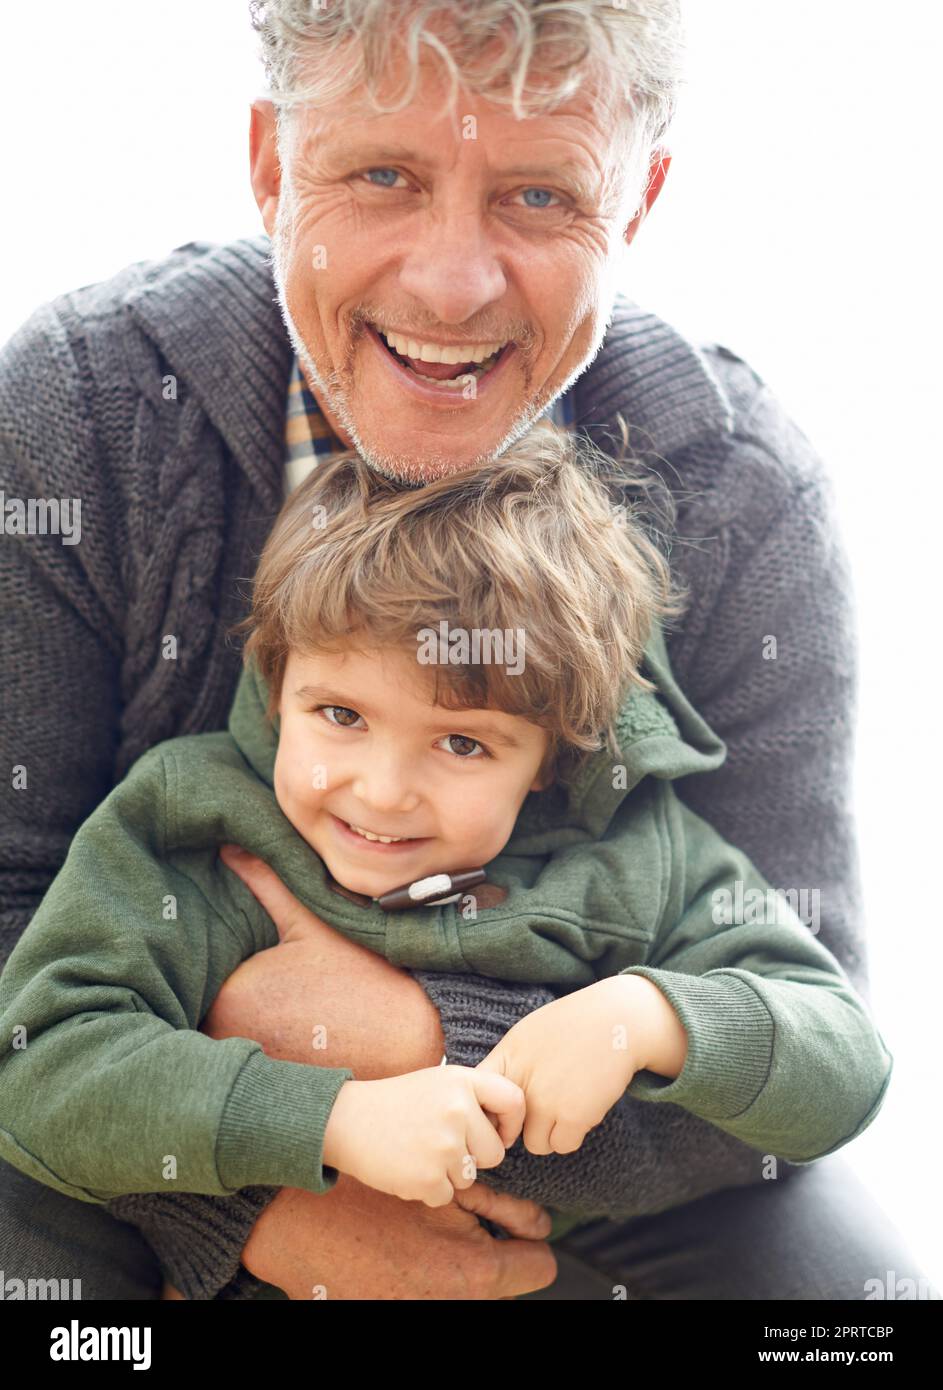 My grandad and best friend. a grandfather enjoying a day outside with his grandson. Stock Photo